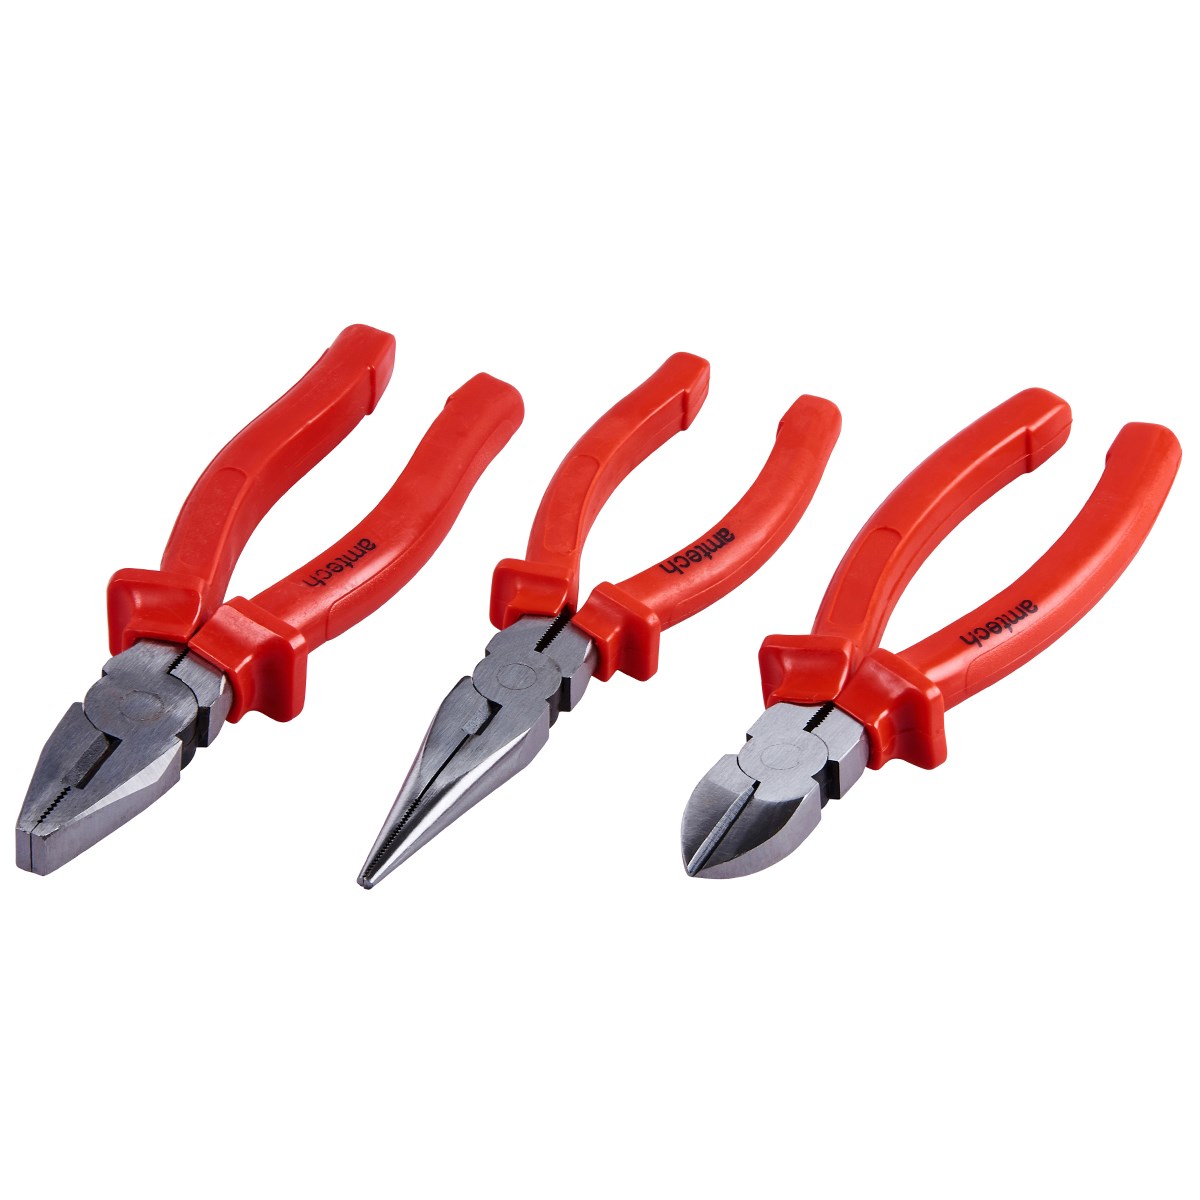 3 pc Superior Pliers Set Heavy Duty Combination Long Nose Wire Cutter